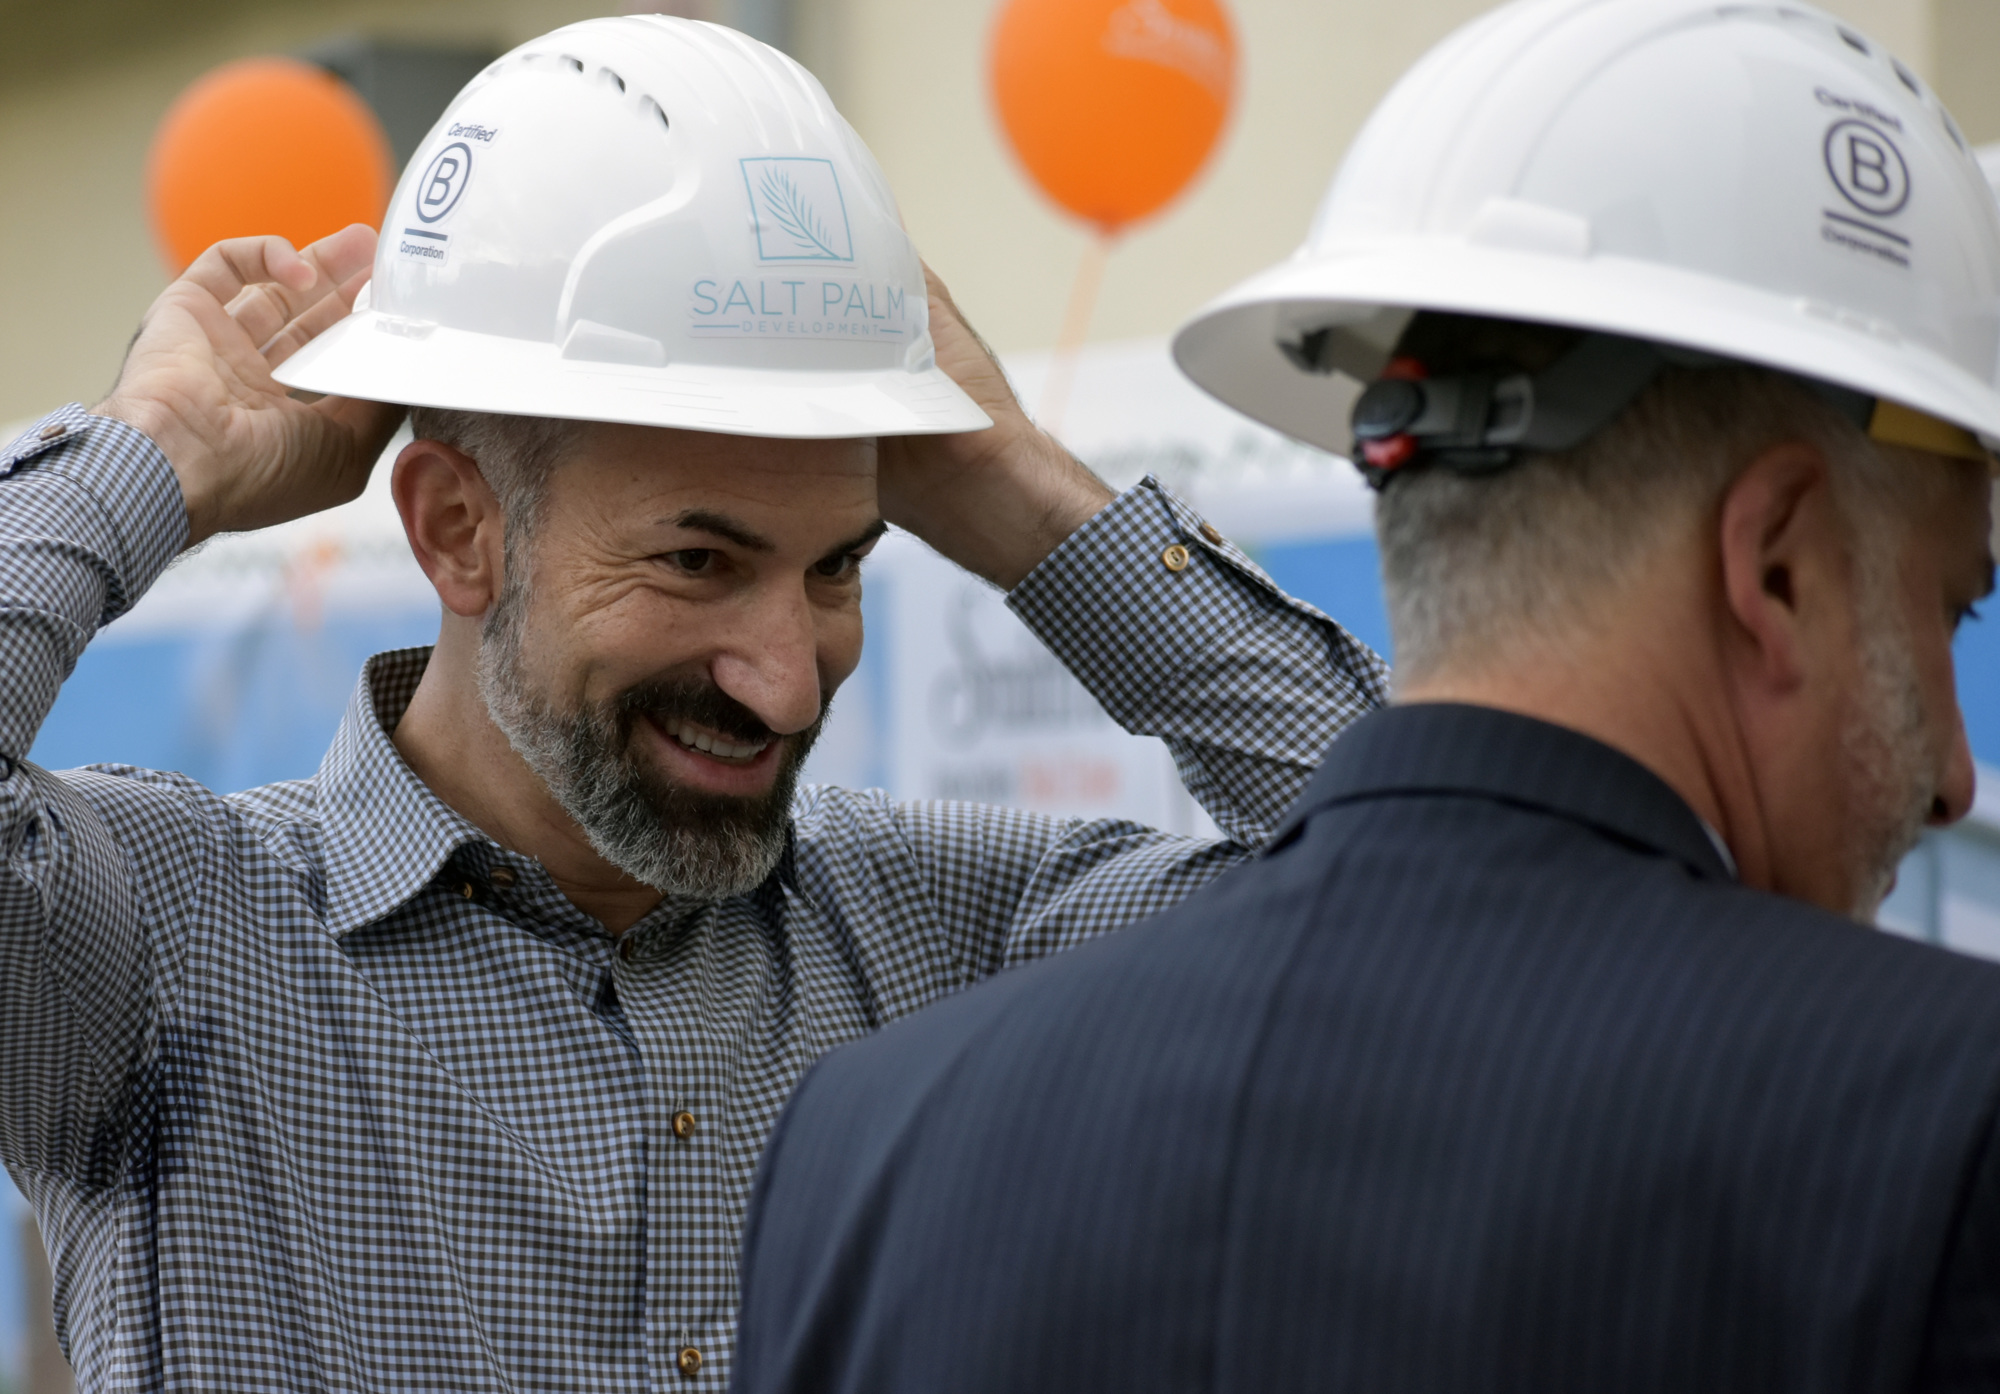 Salt Palm Development founder Jared Meyers, left, with St. Petersburg Mayor Rick Kriseman at the Dec. 12 groundbreaking for The Royal townhome building. Courtesy photo.